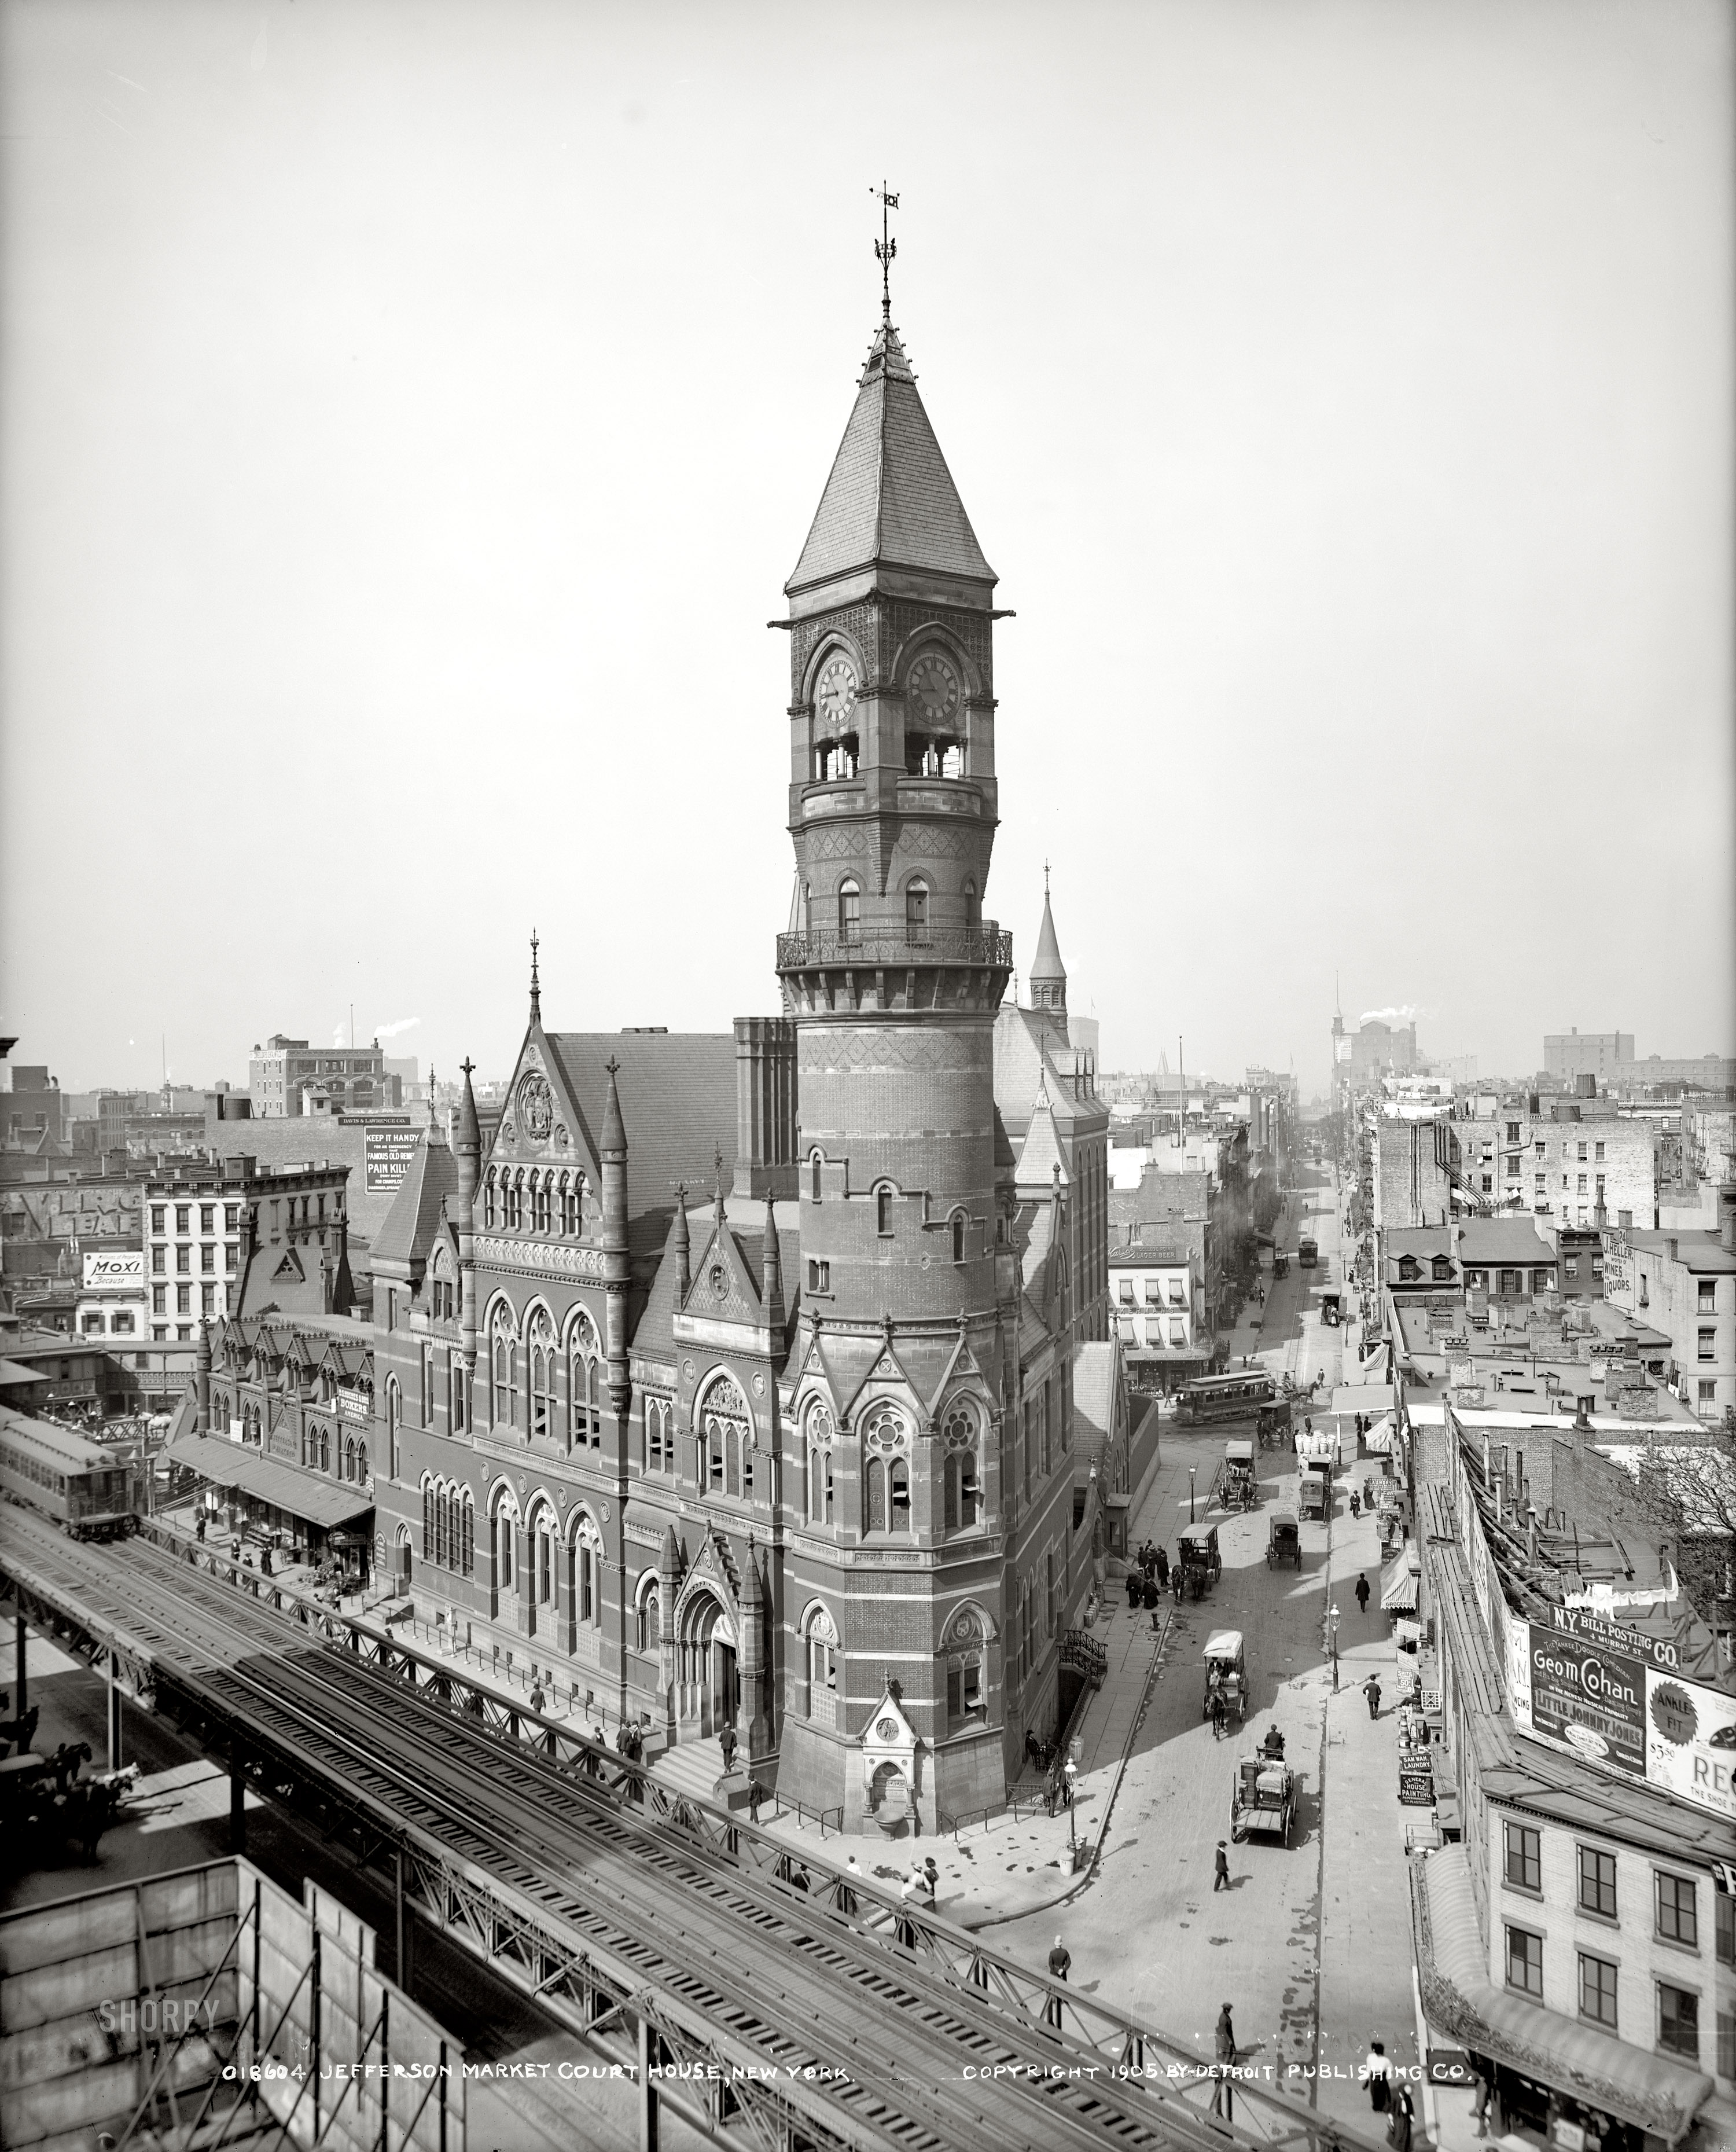 New York City circa 1905. "Jefferson Market Courthouse." Now a library. Looking down West 10th Street at Sixth Avenue in Greenwich Village. 8x10 inch dry plate glass negative, Detroit Publishing Company. View full size.